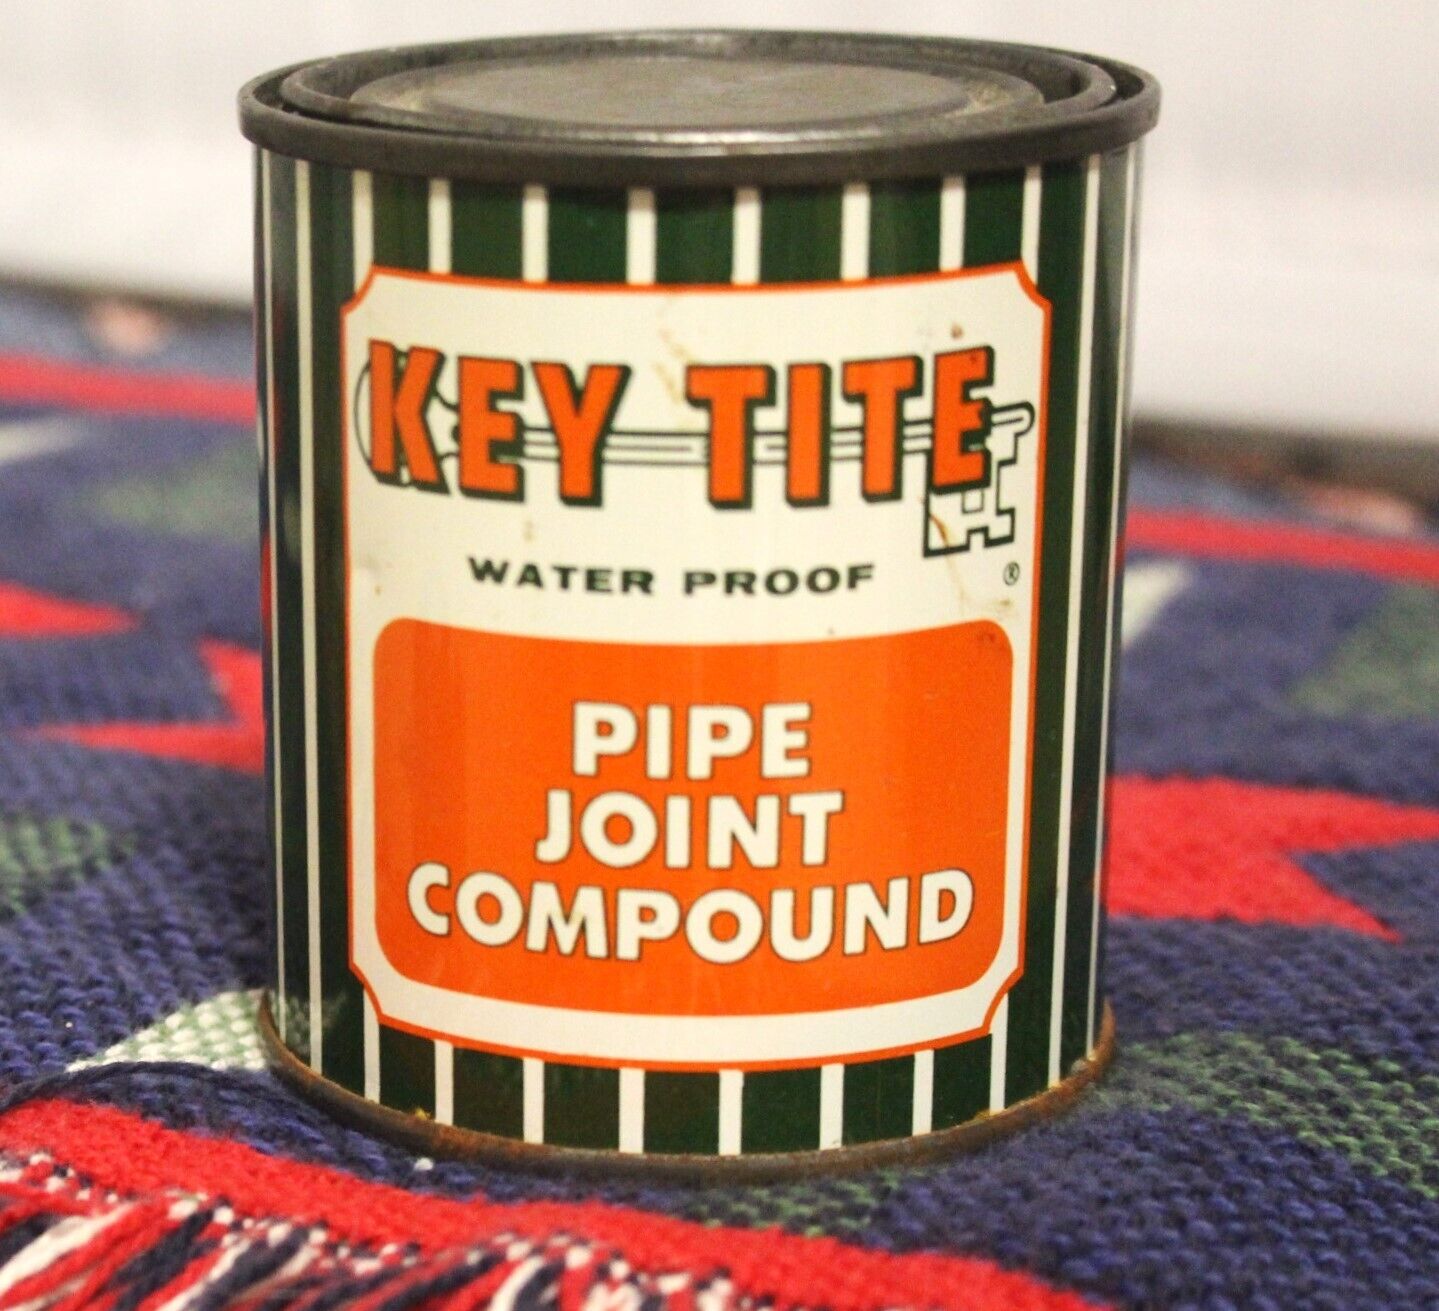 Vtg 1960\'s/50s KEY TITE  Pipe Joint Compound Metal Can Advertising - Nearly full